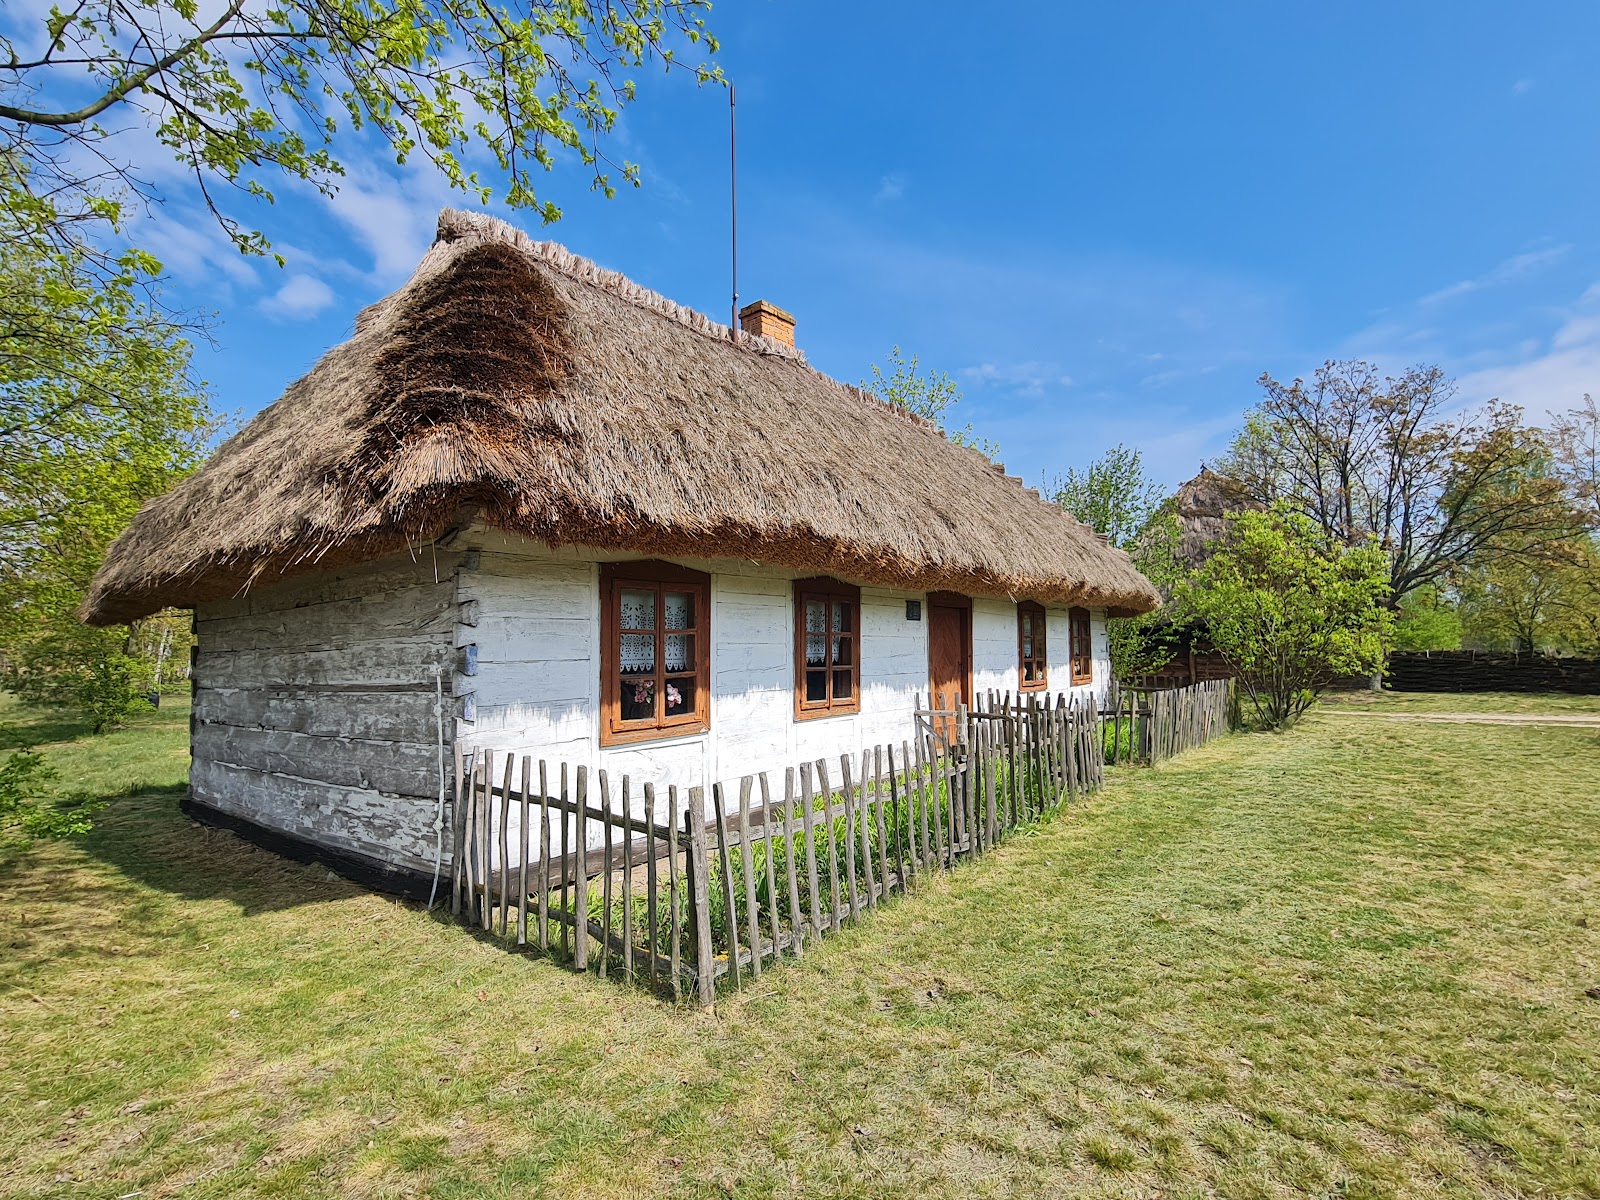 Open-air museum of Łowicz's Folk Culture